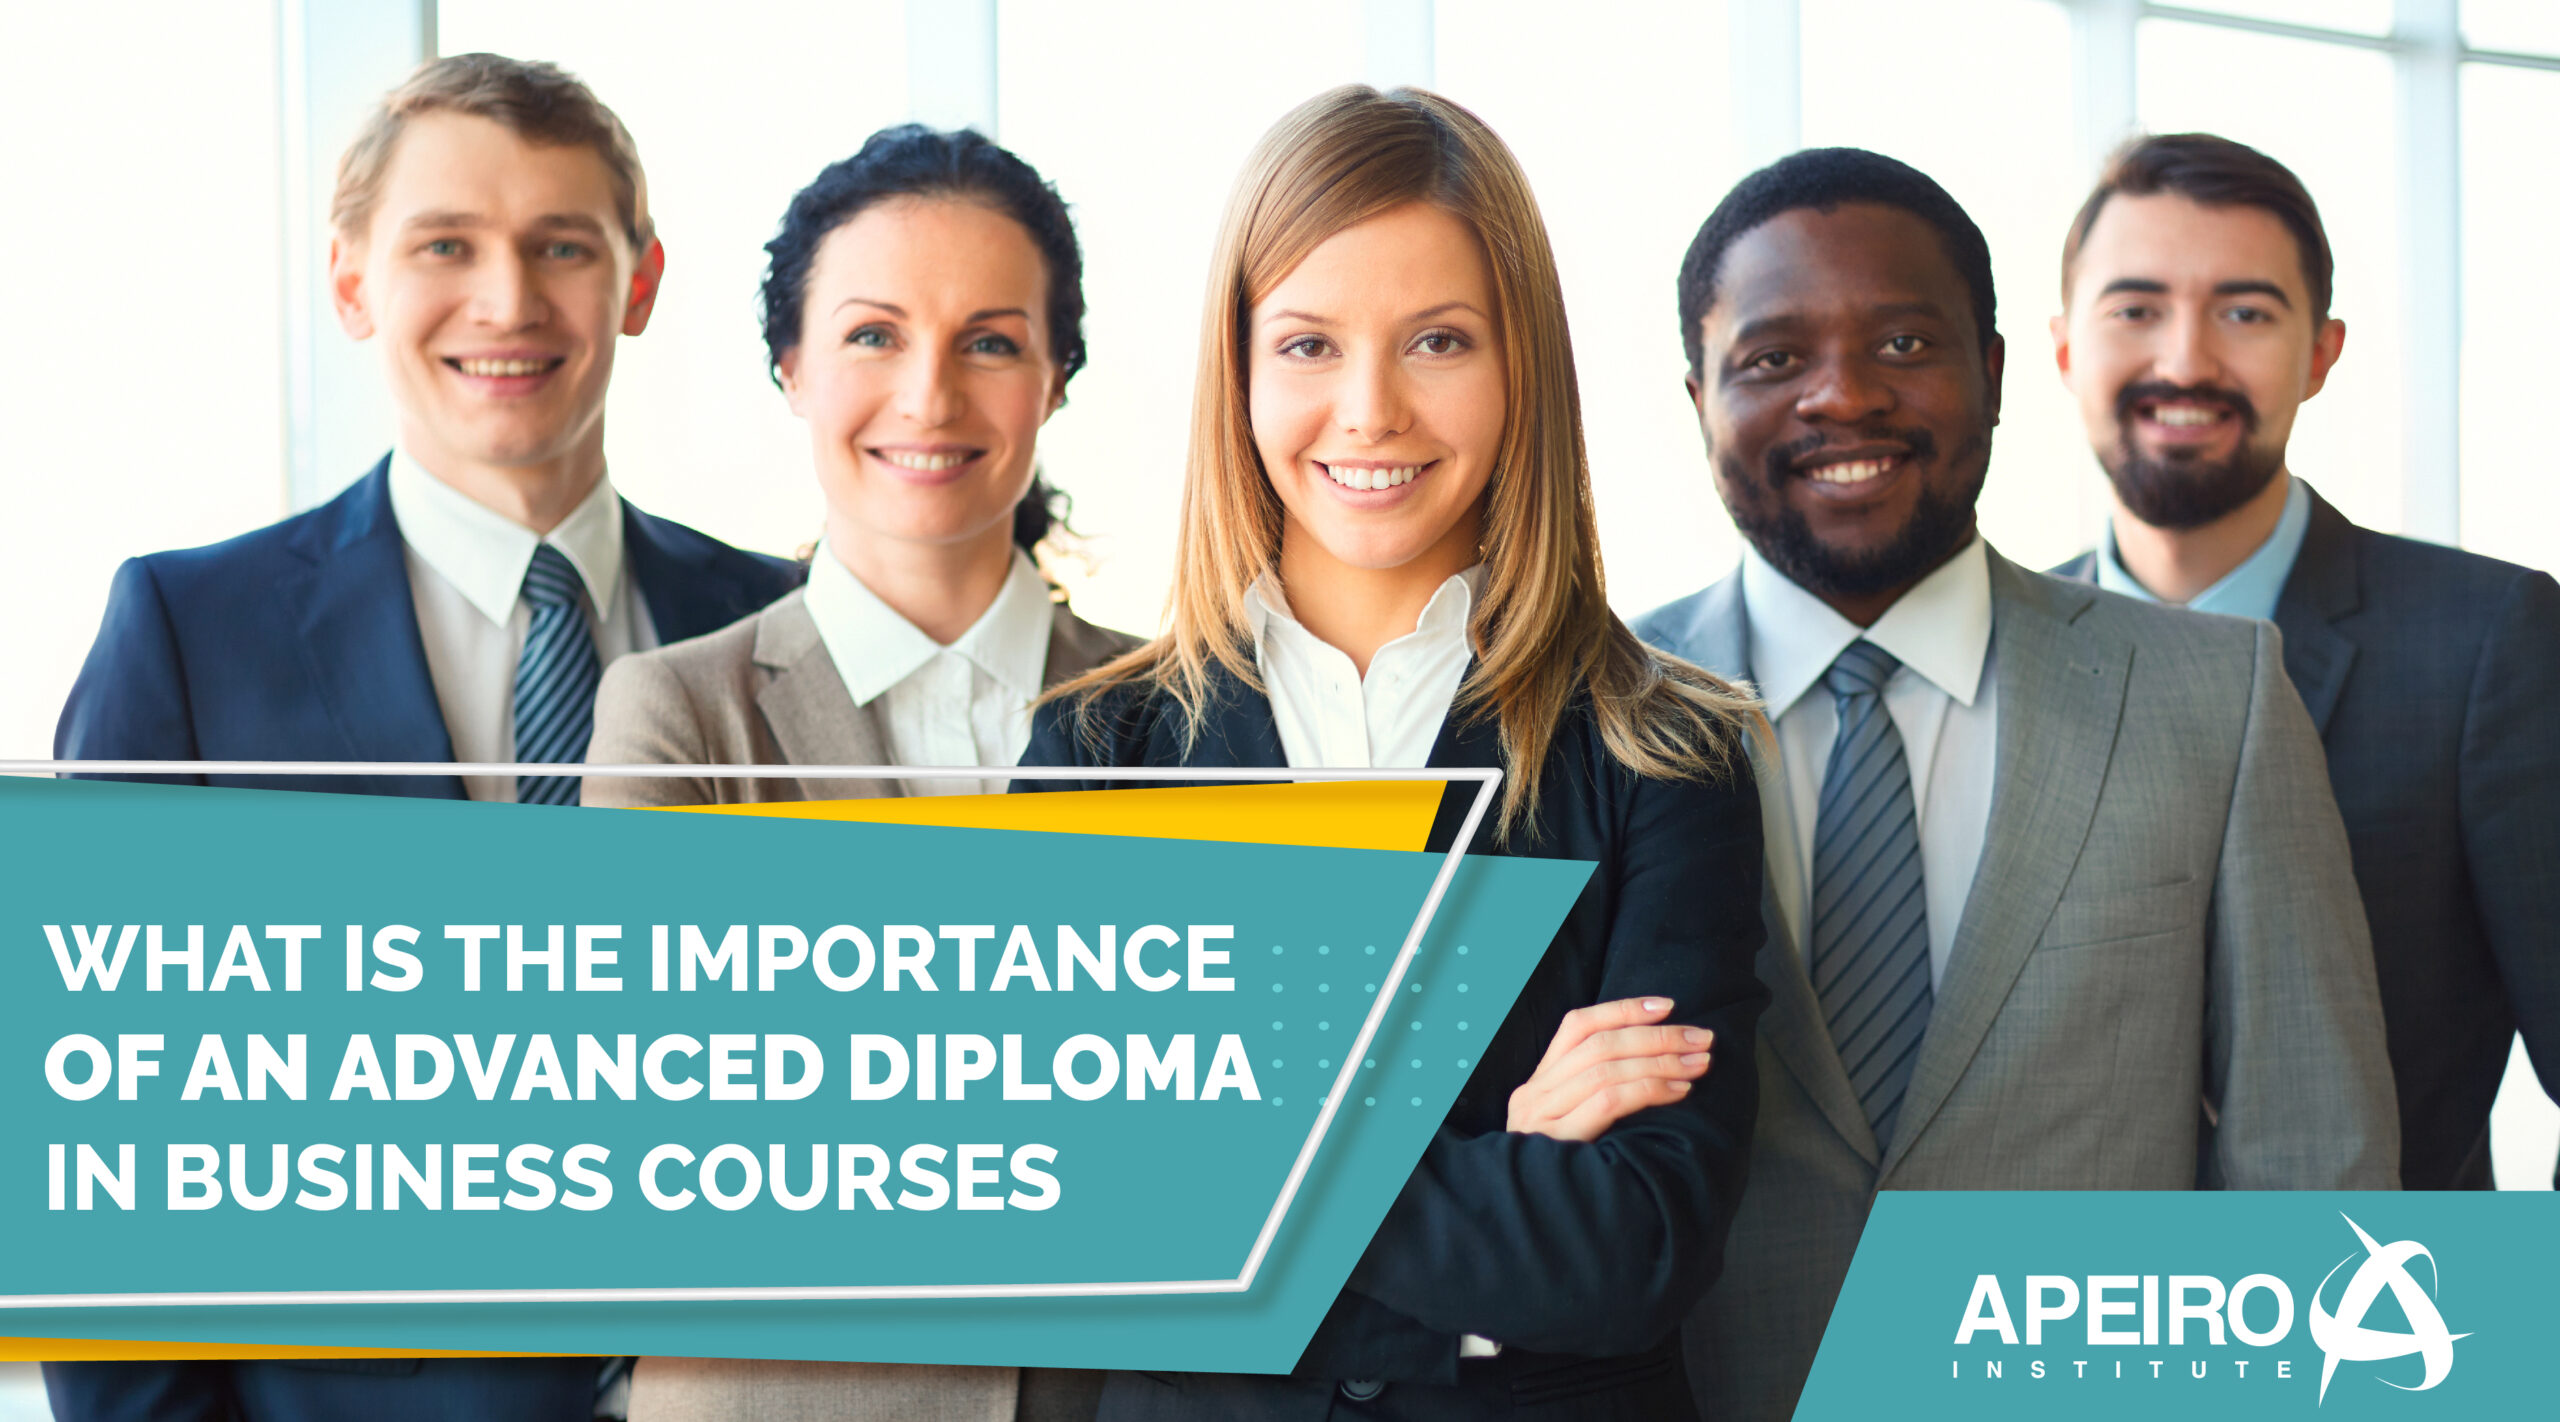 What Is The Importance Of An Advanced Diploma In Business Courses?